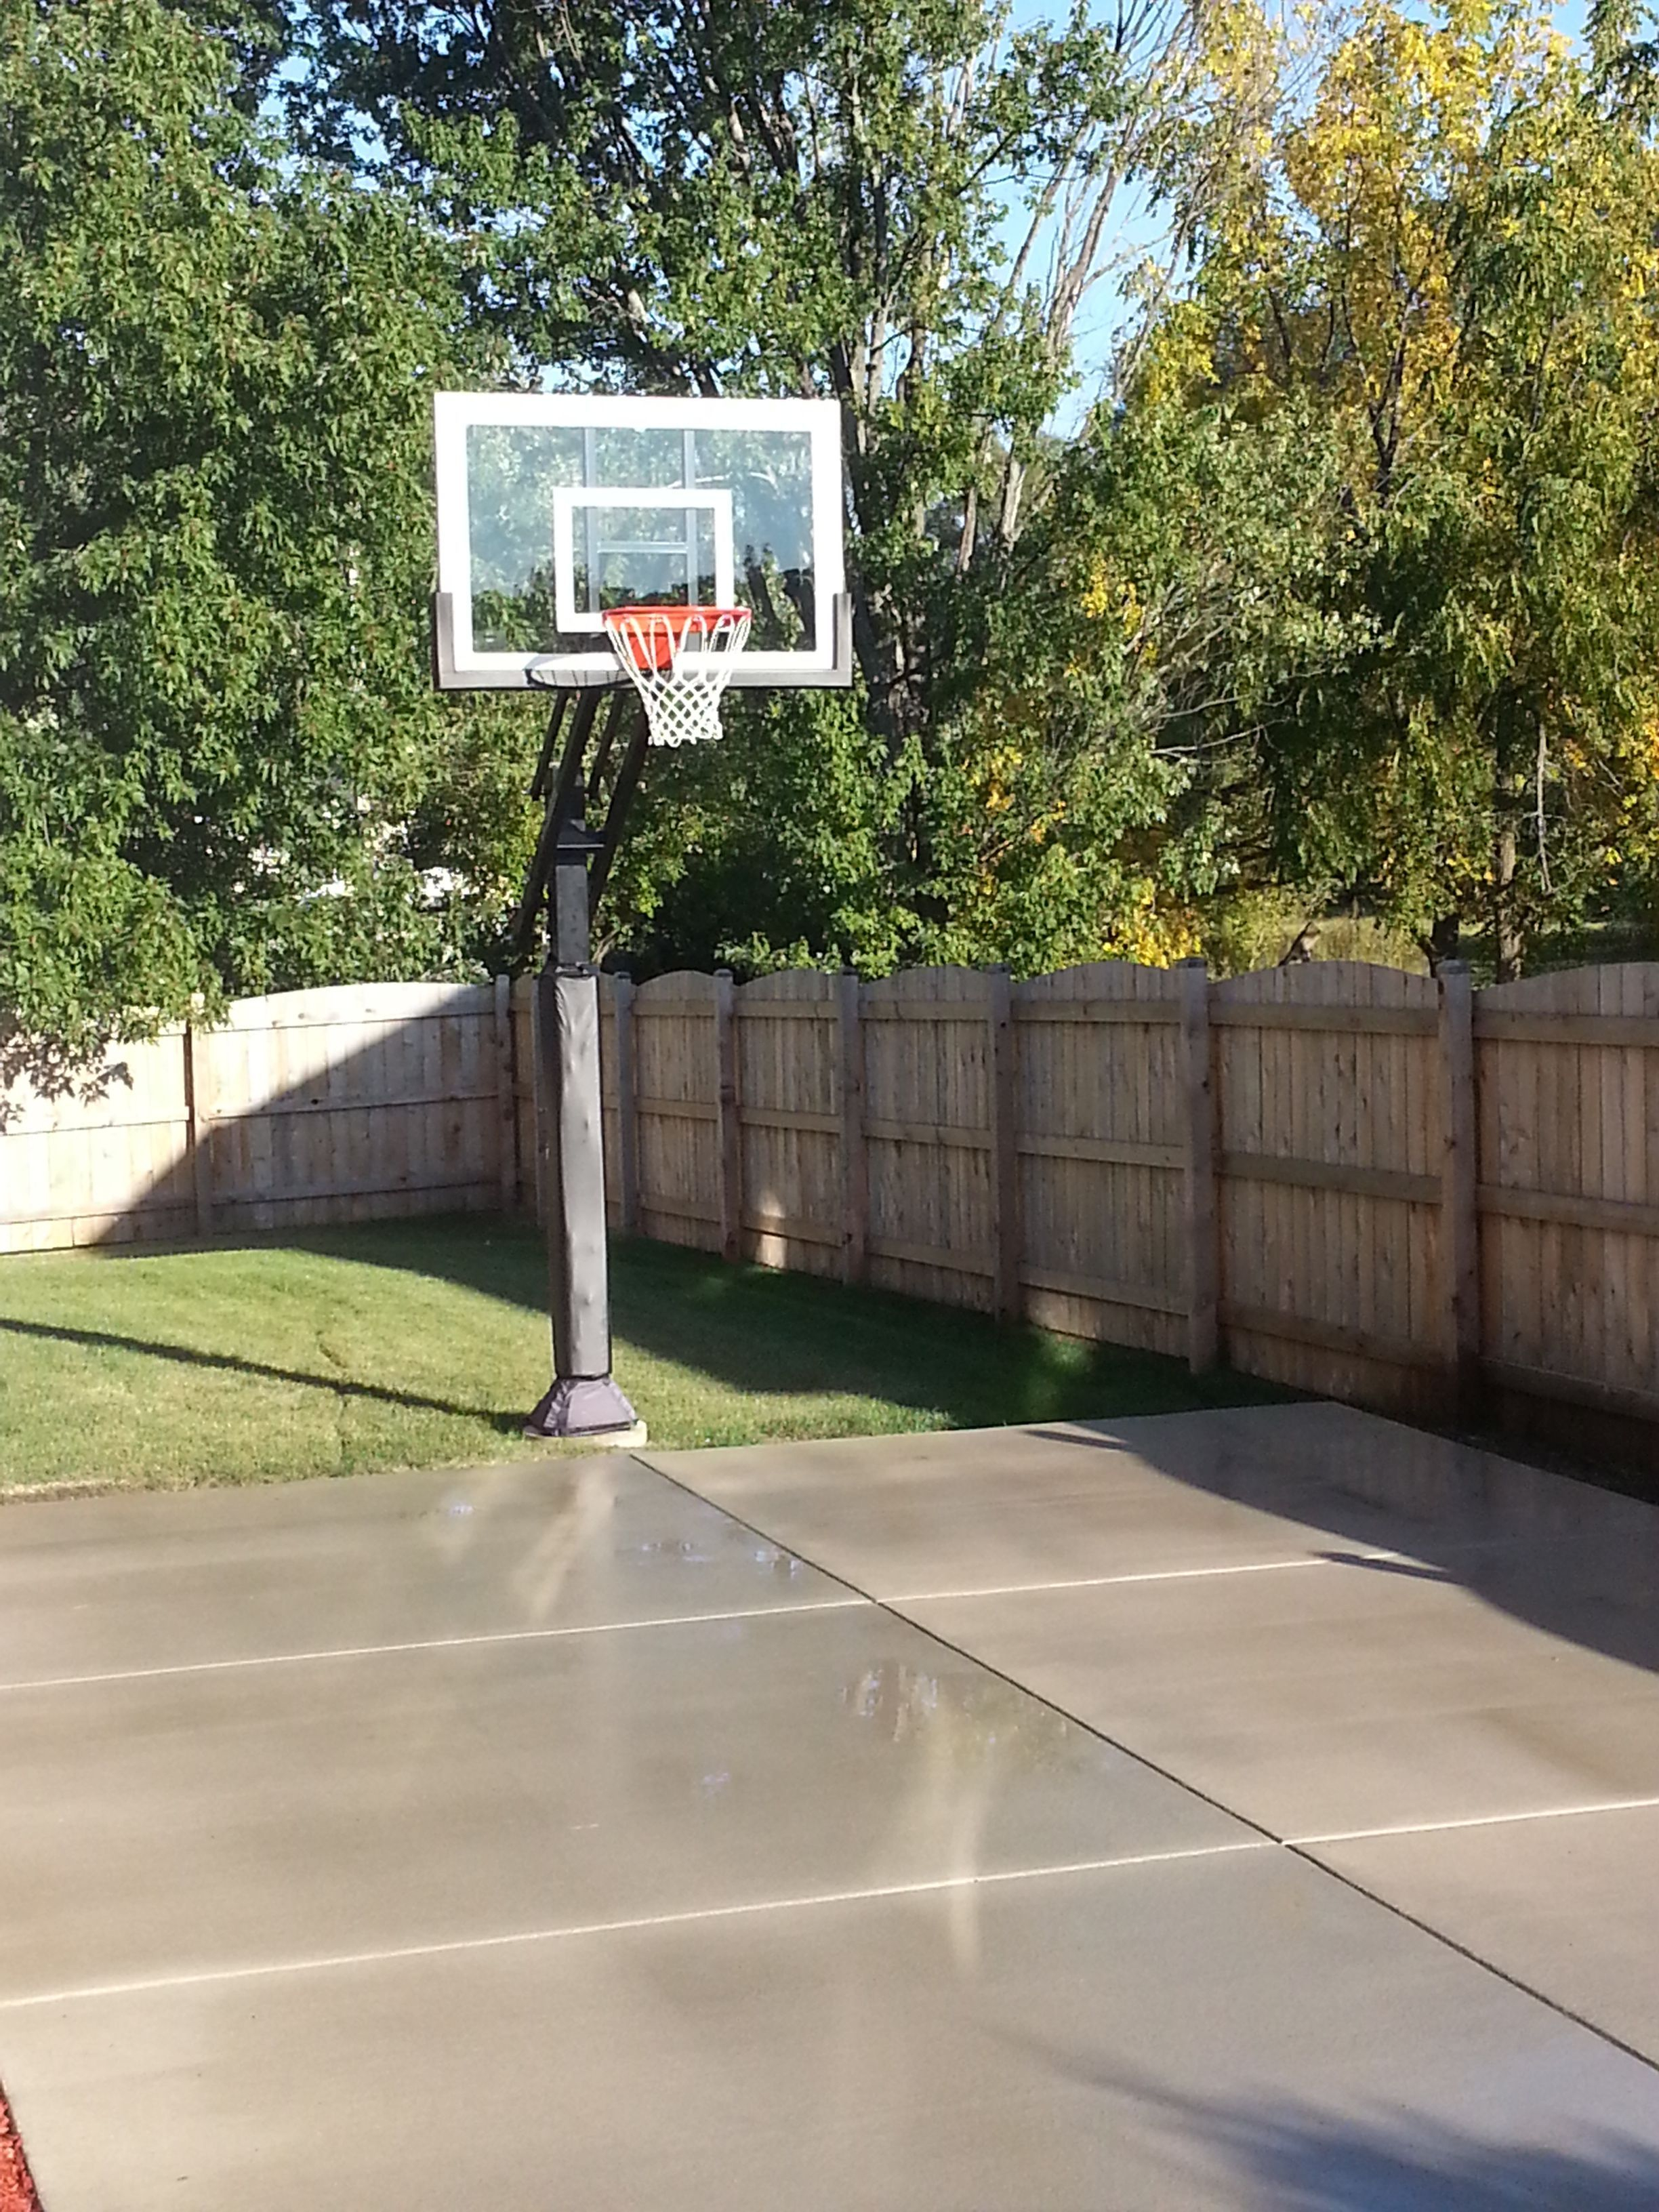 The Backyard Fence Encompasses This Pro Dunk Silver Basketball Goal throughout size 2448 X 3264